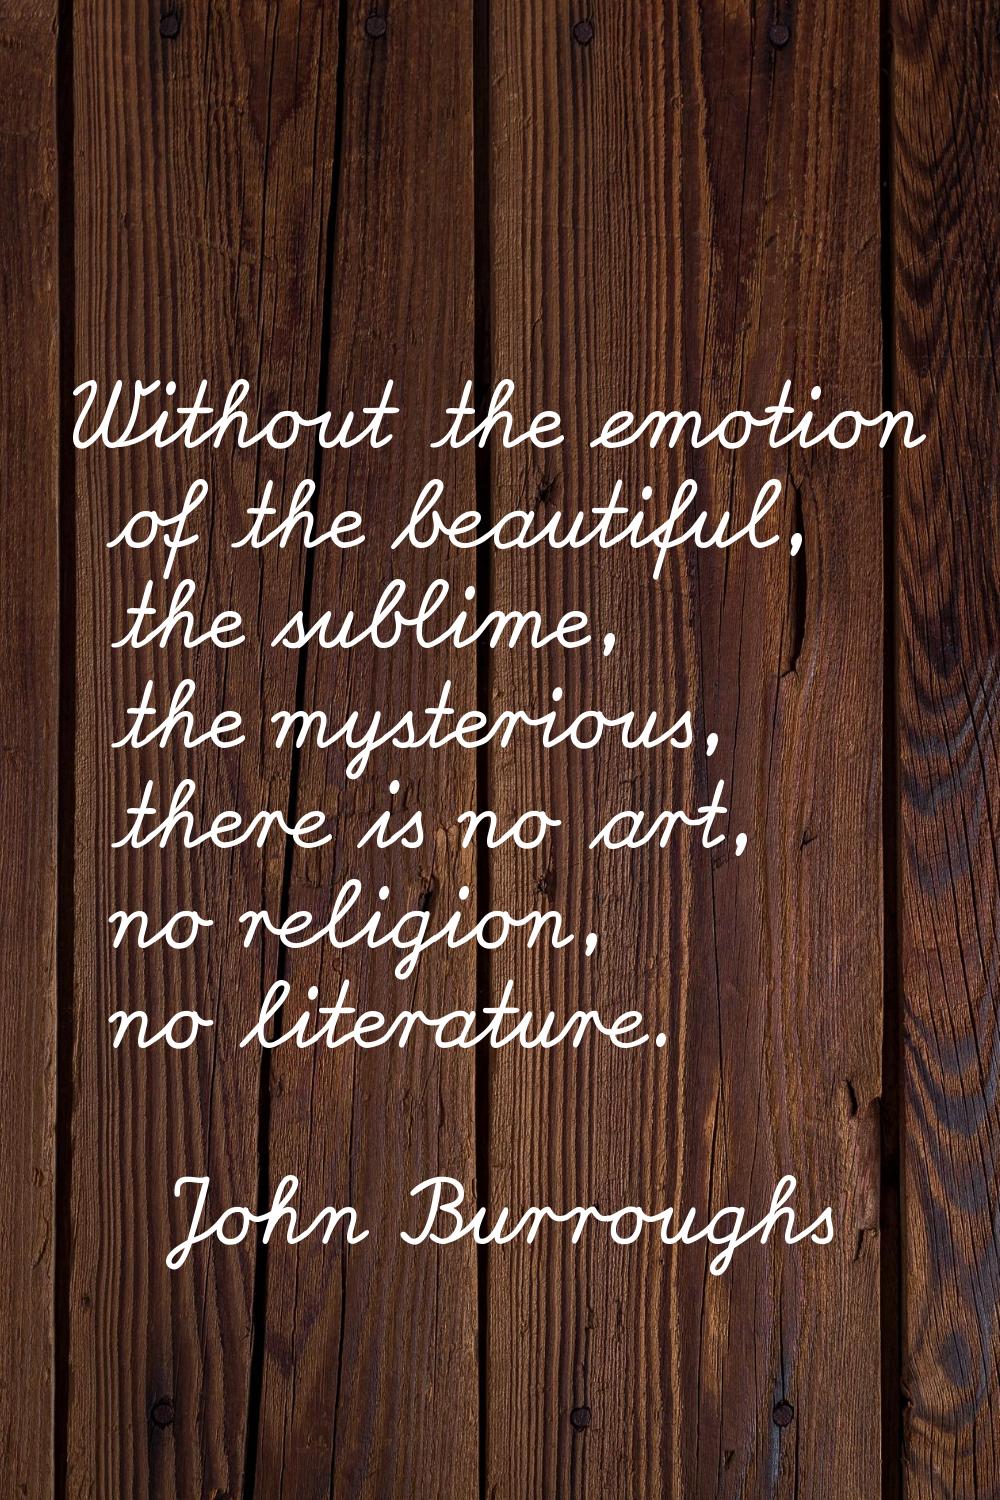 Without the emotion of the beautiful, the sublime, the mysterious, there is no art, no religion, no